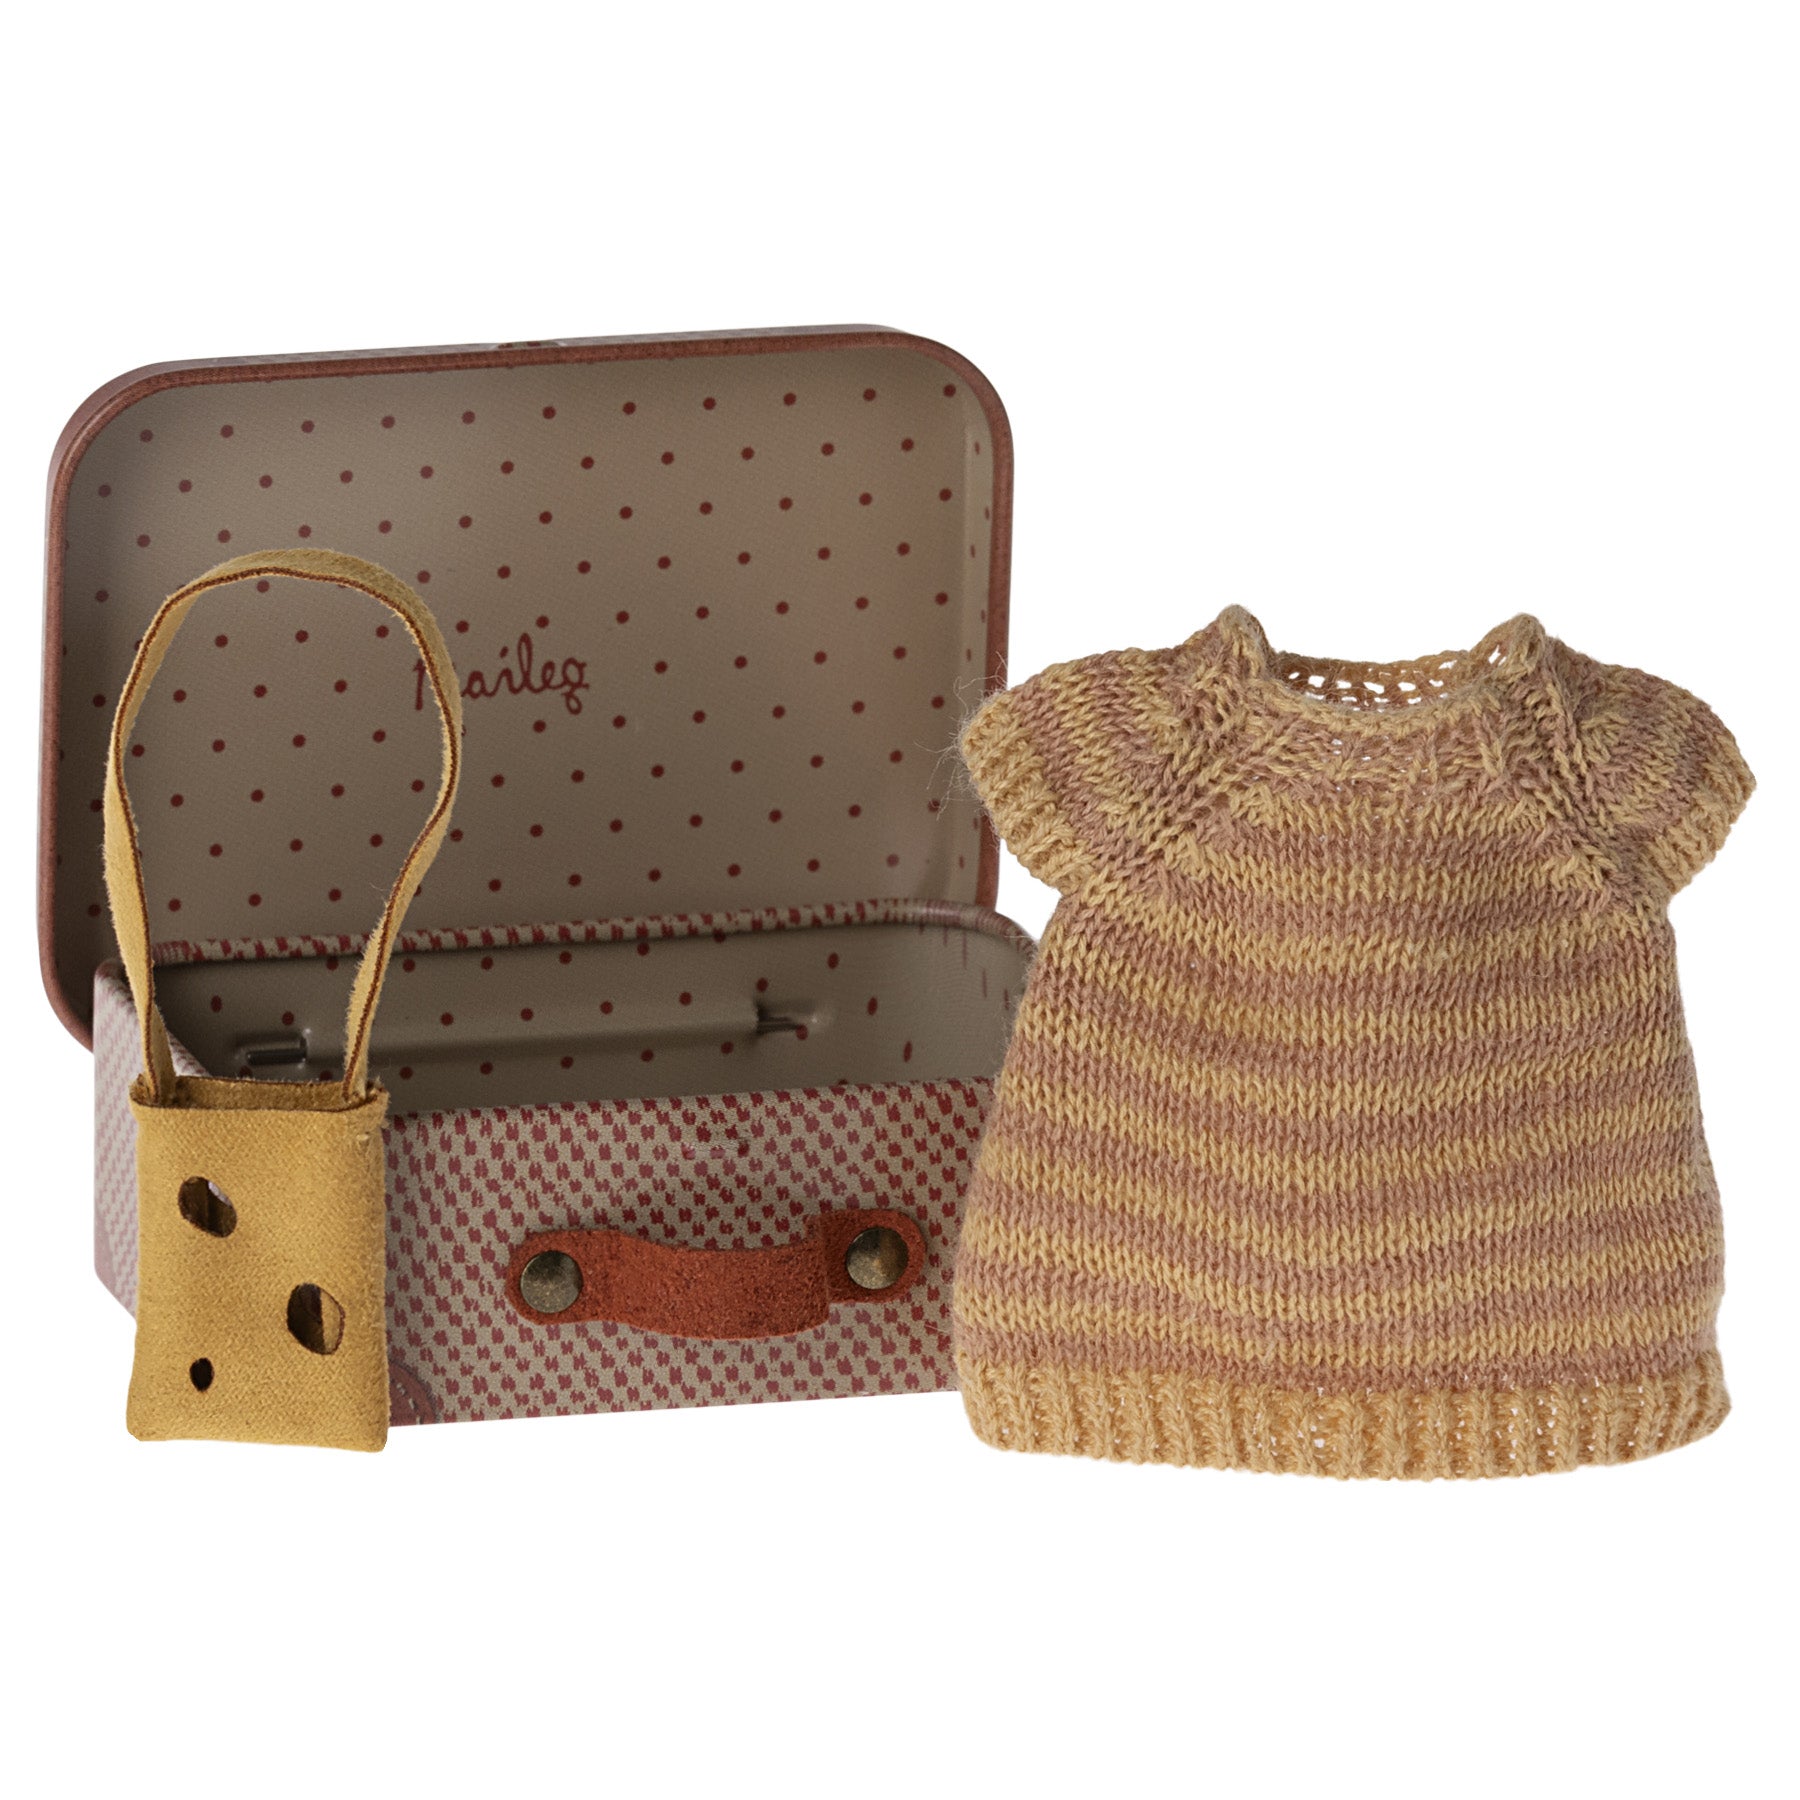 maileg knitted dress and bag next to a metal  case